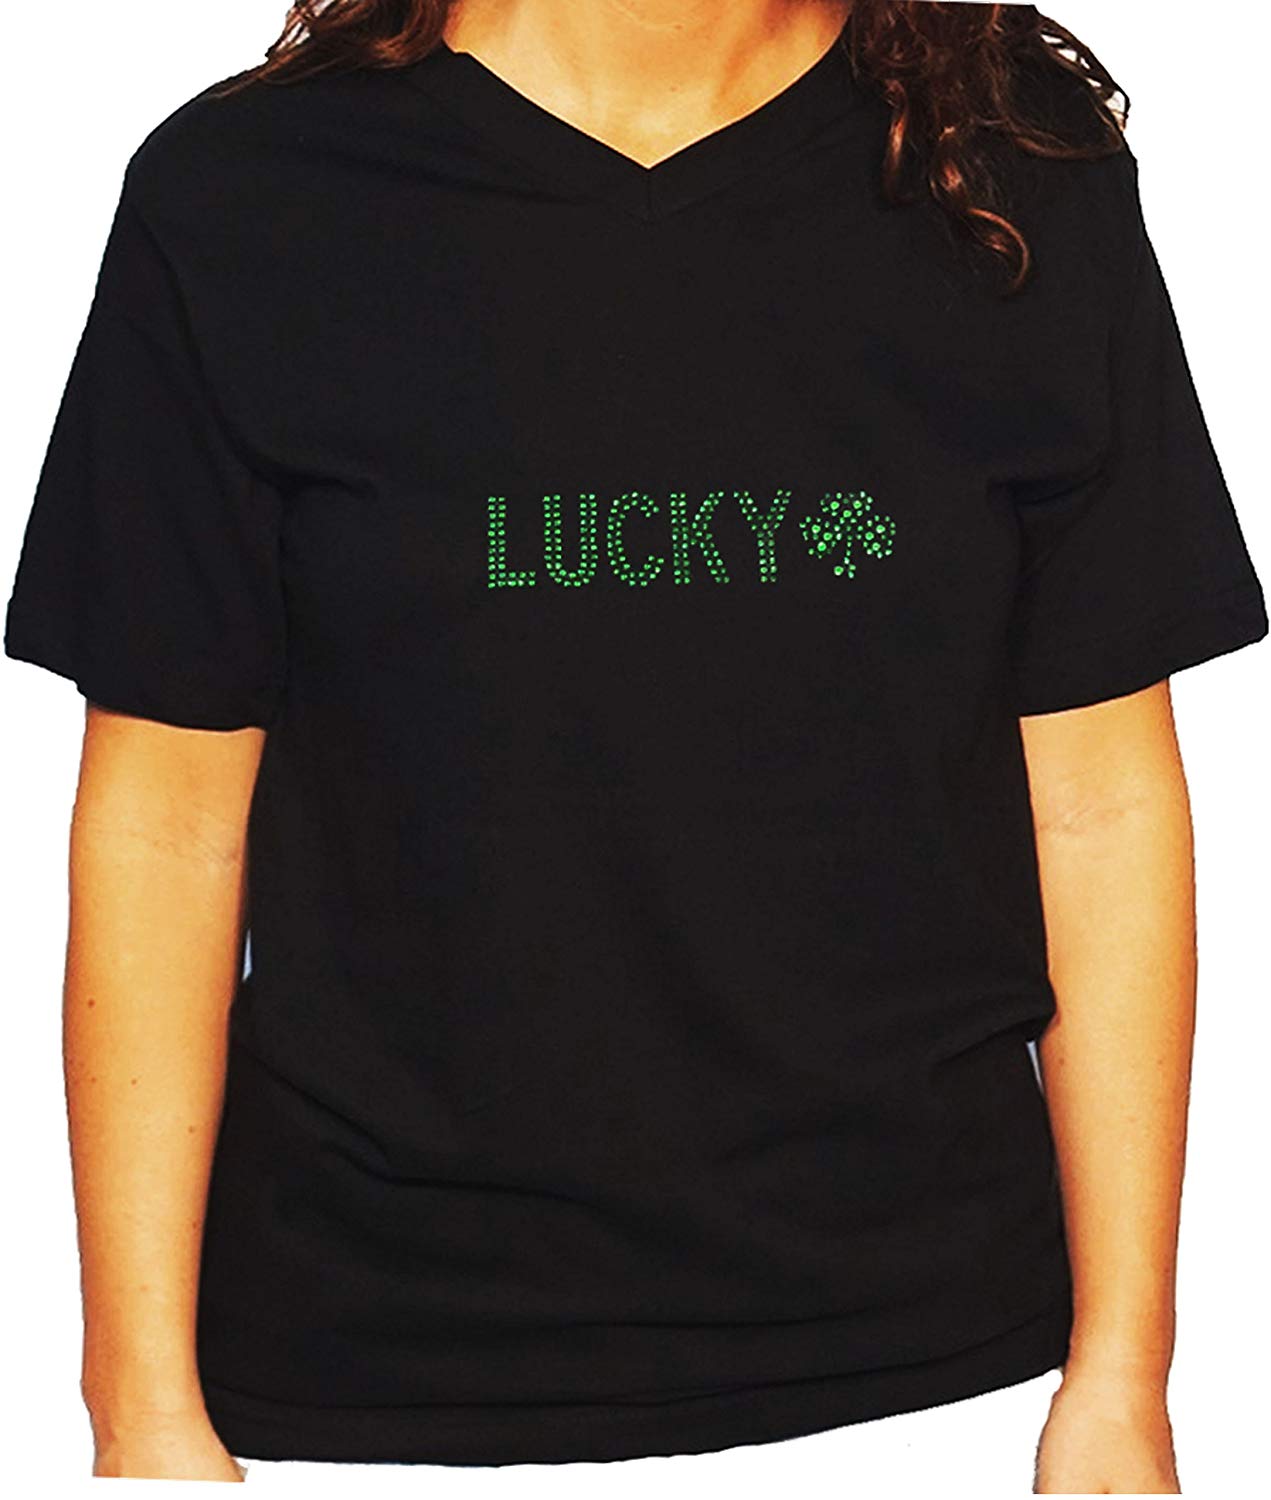 Women's / Unisex T-Shirt with Lucky Clover In Rhinestones